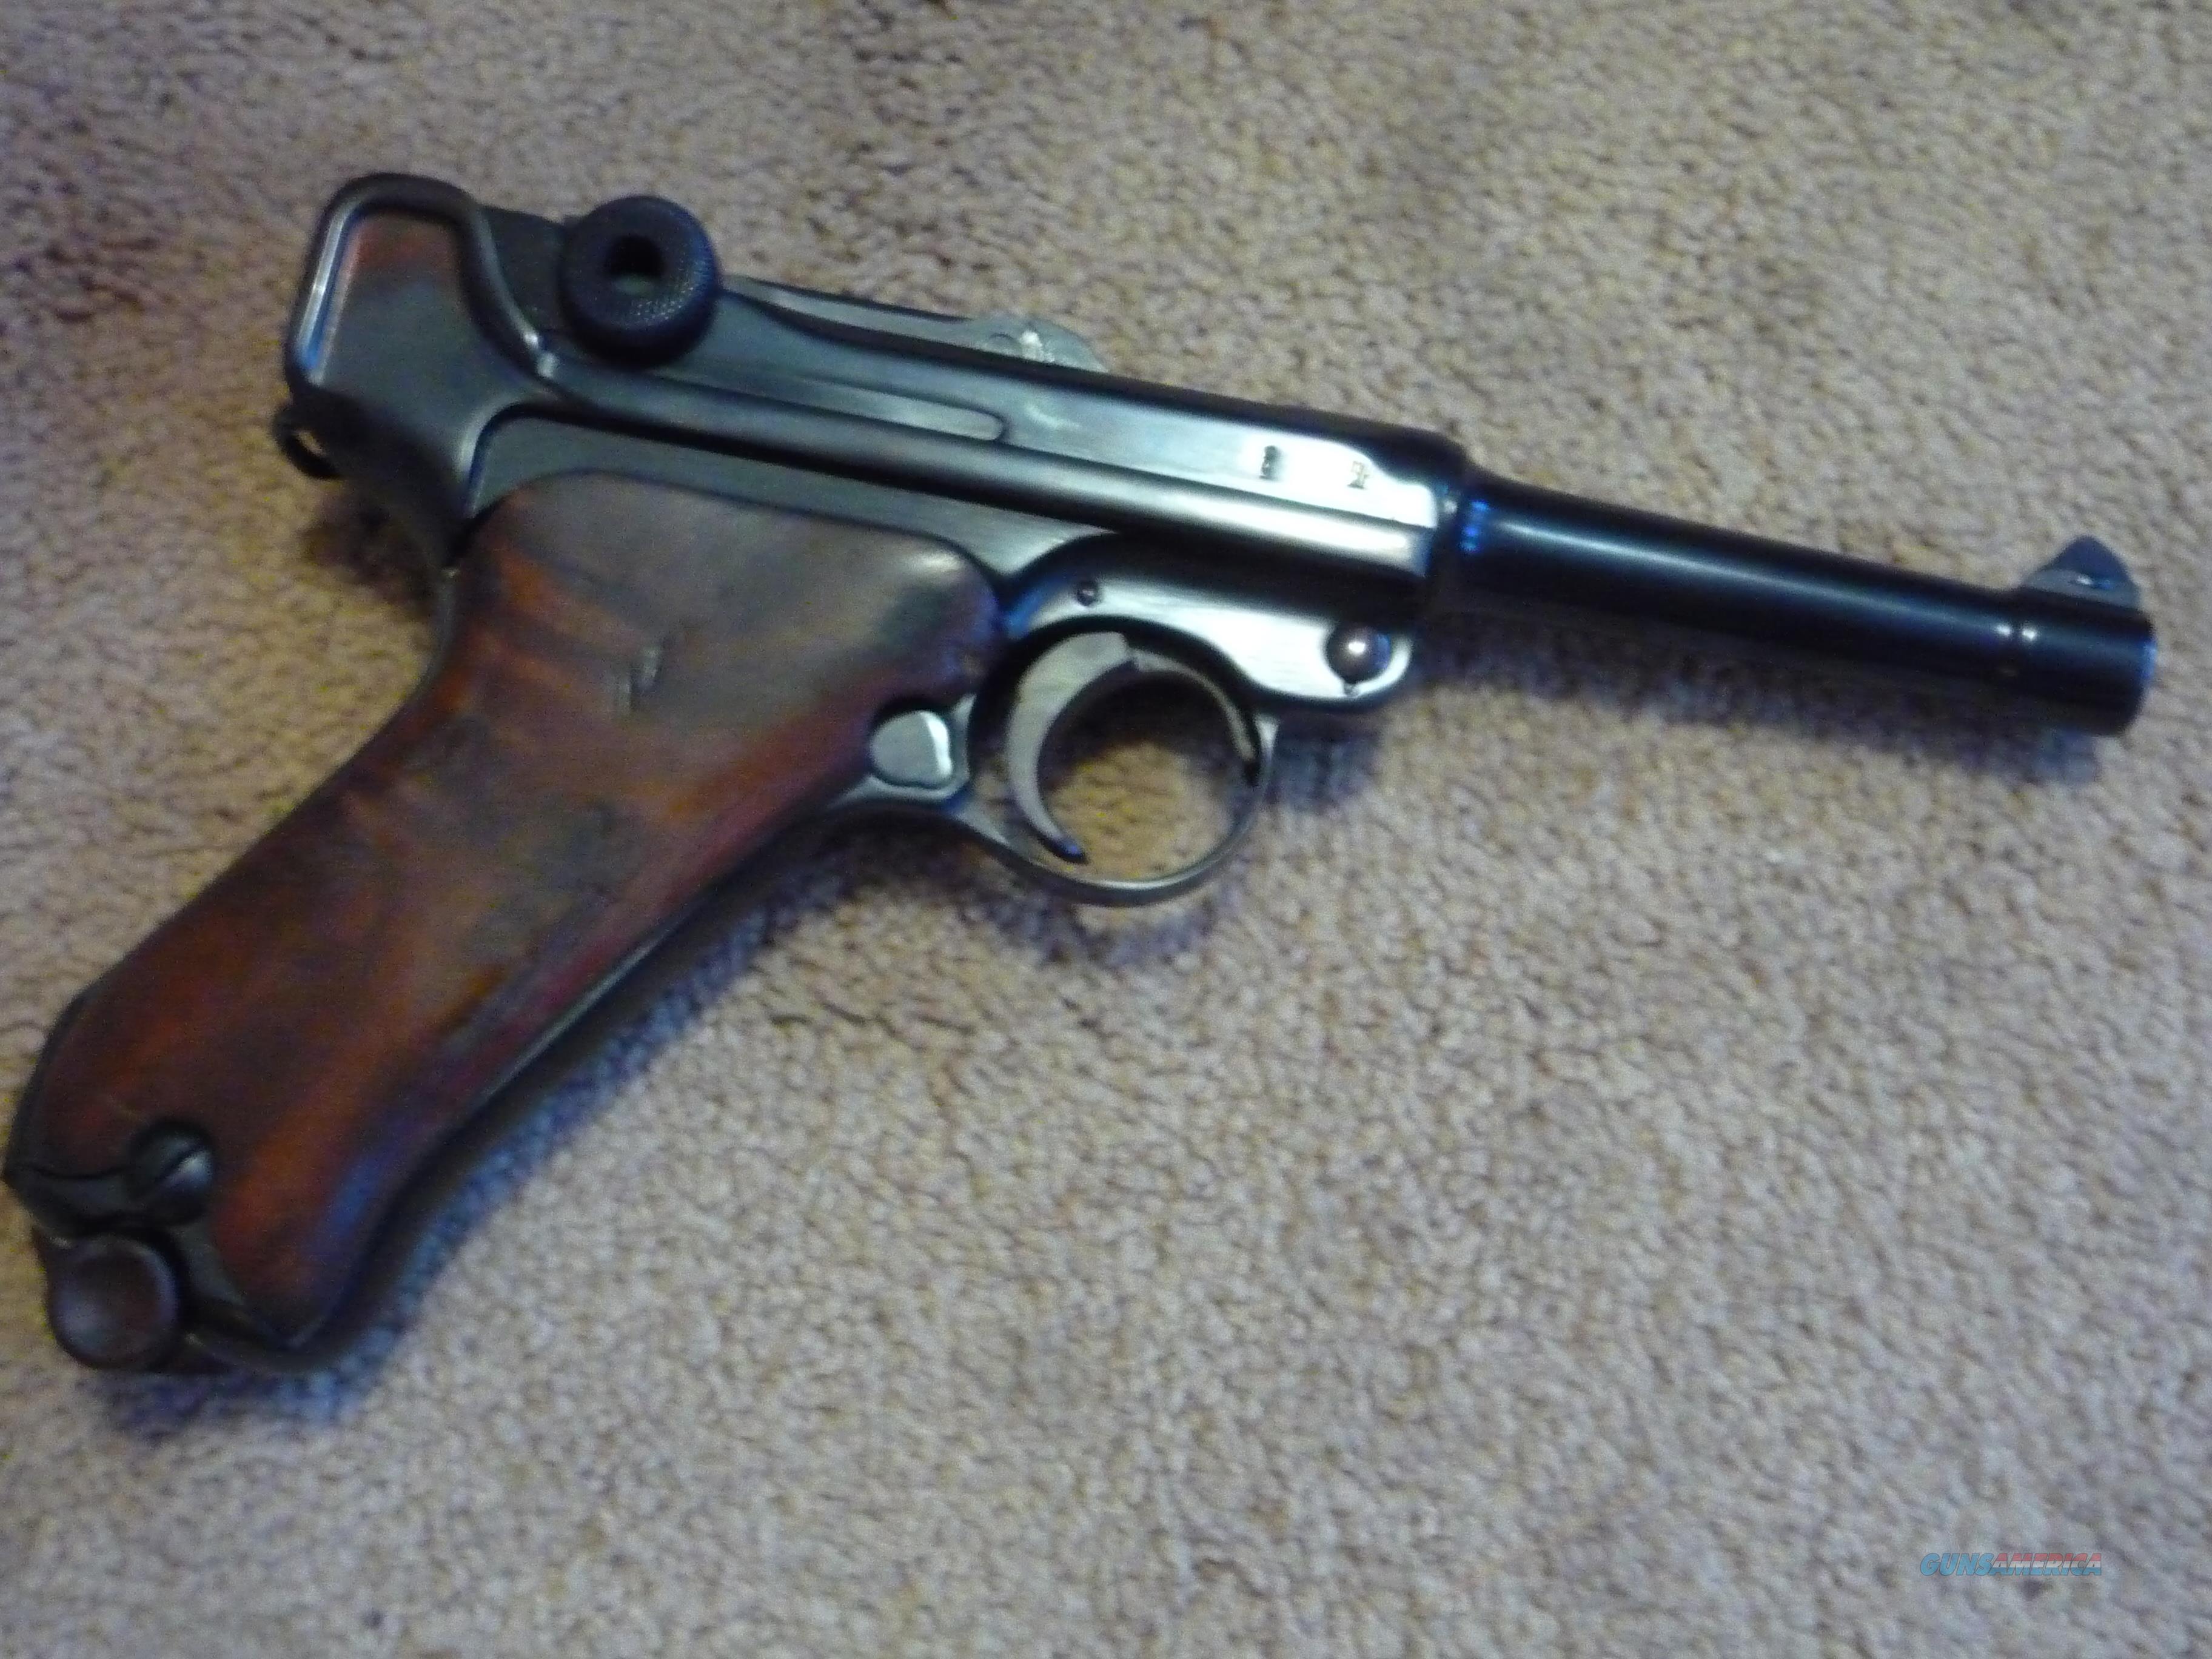 Luger Pistol Pics, Weapons Collection